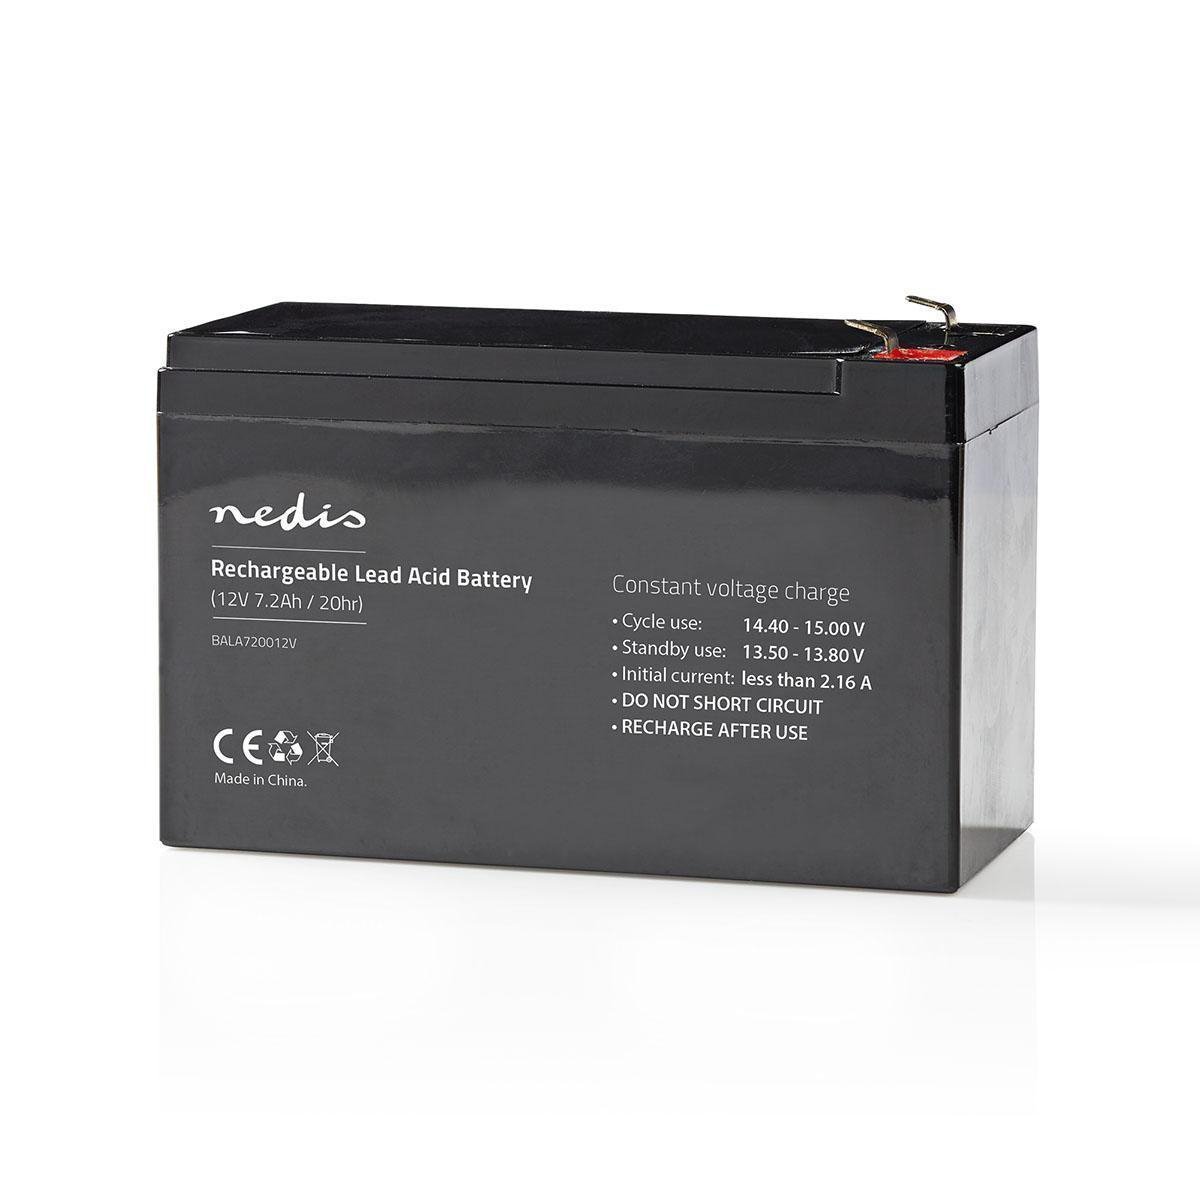 12V 7.2A Rechargeable Lead-Acid Battery 151 x 65 x 95 mm